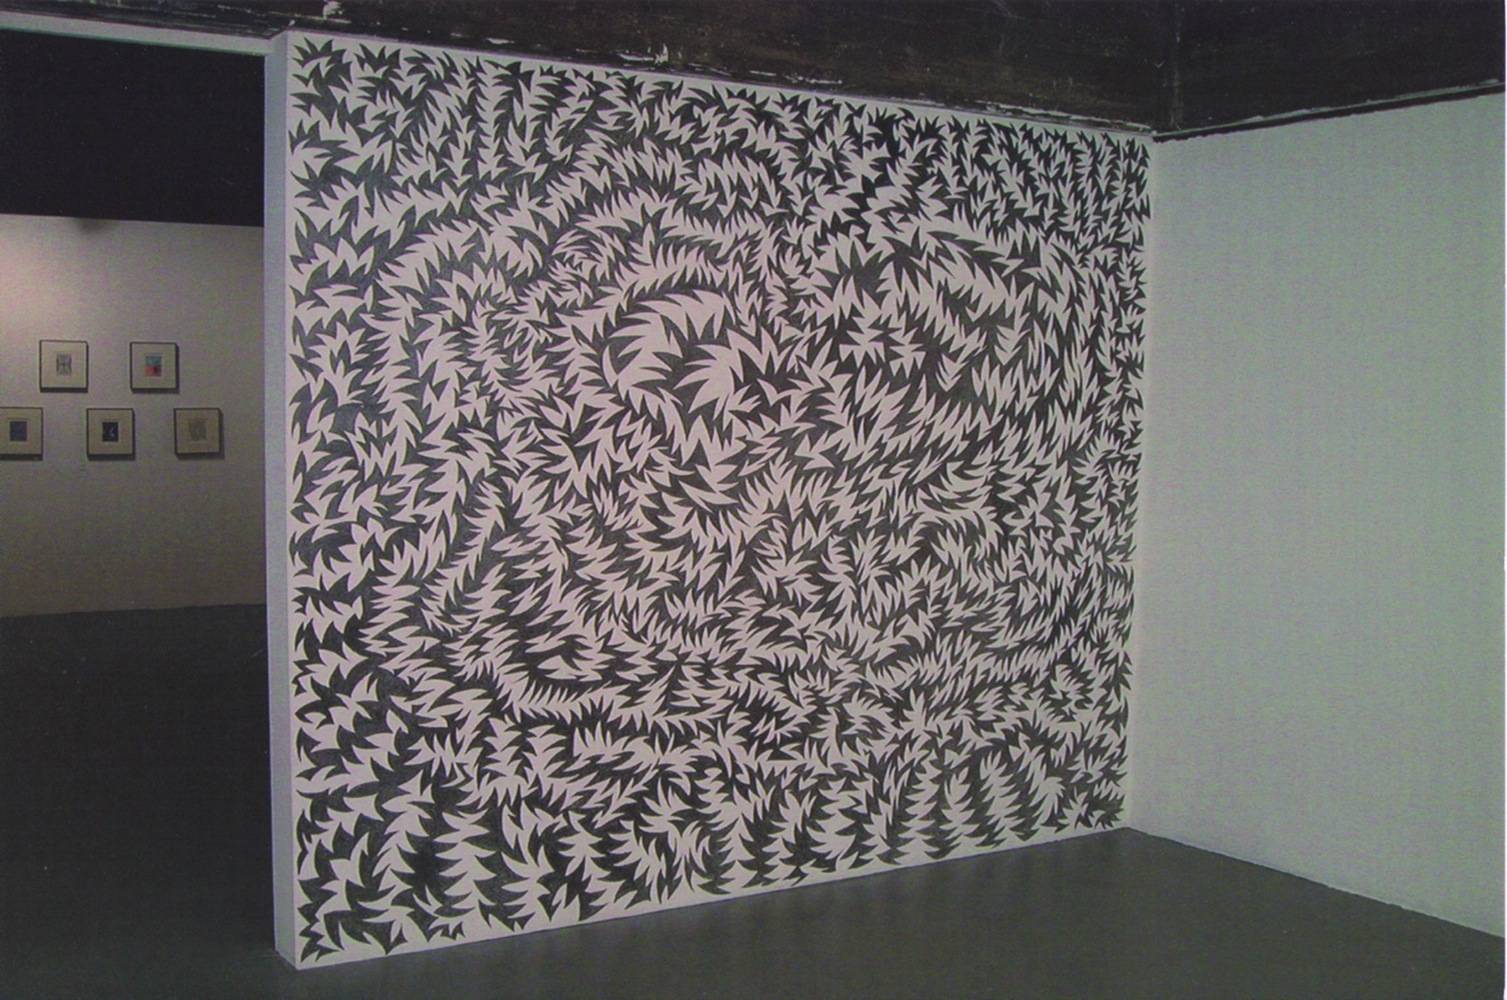 Untitled wall drawing